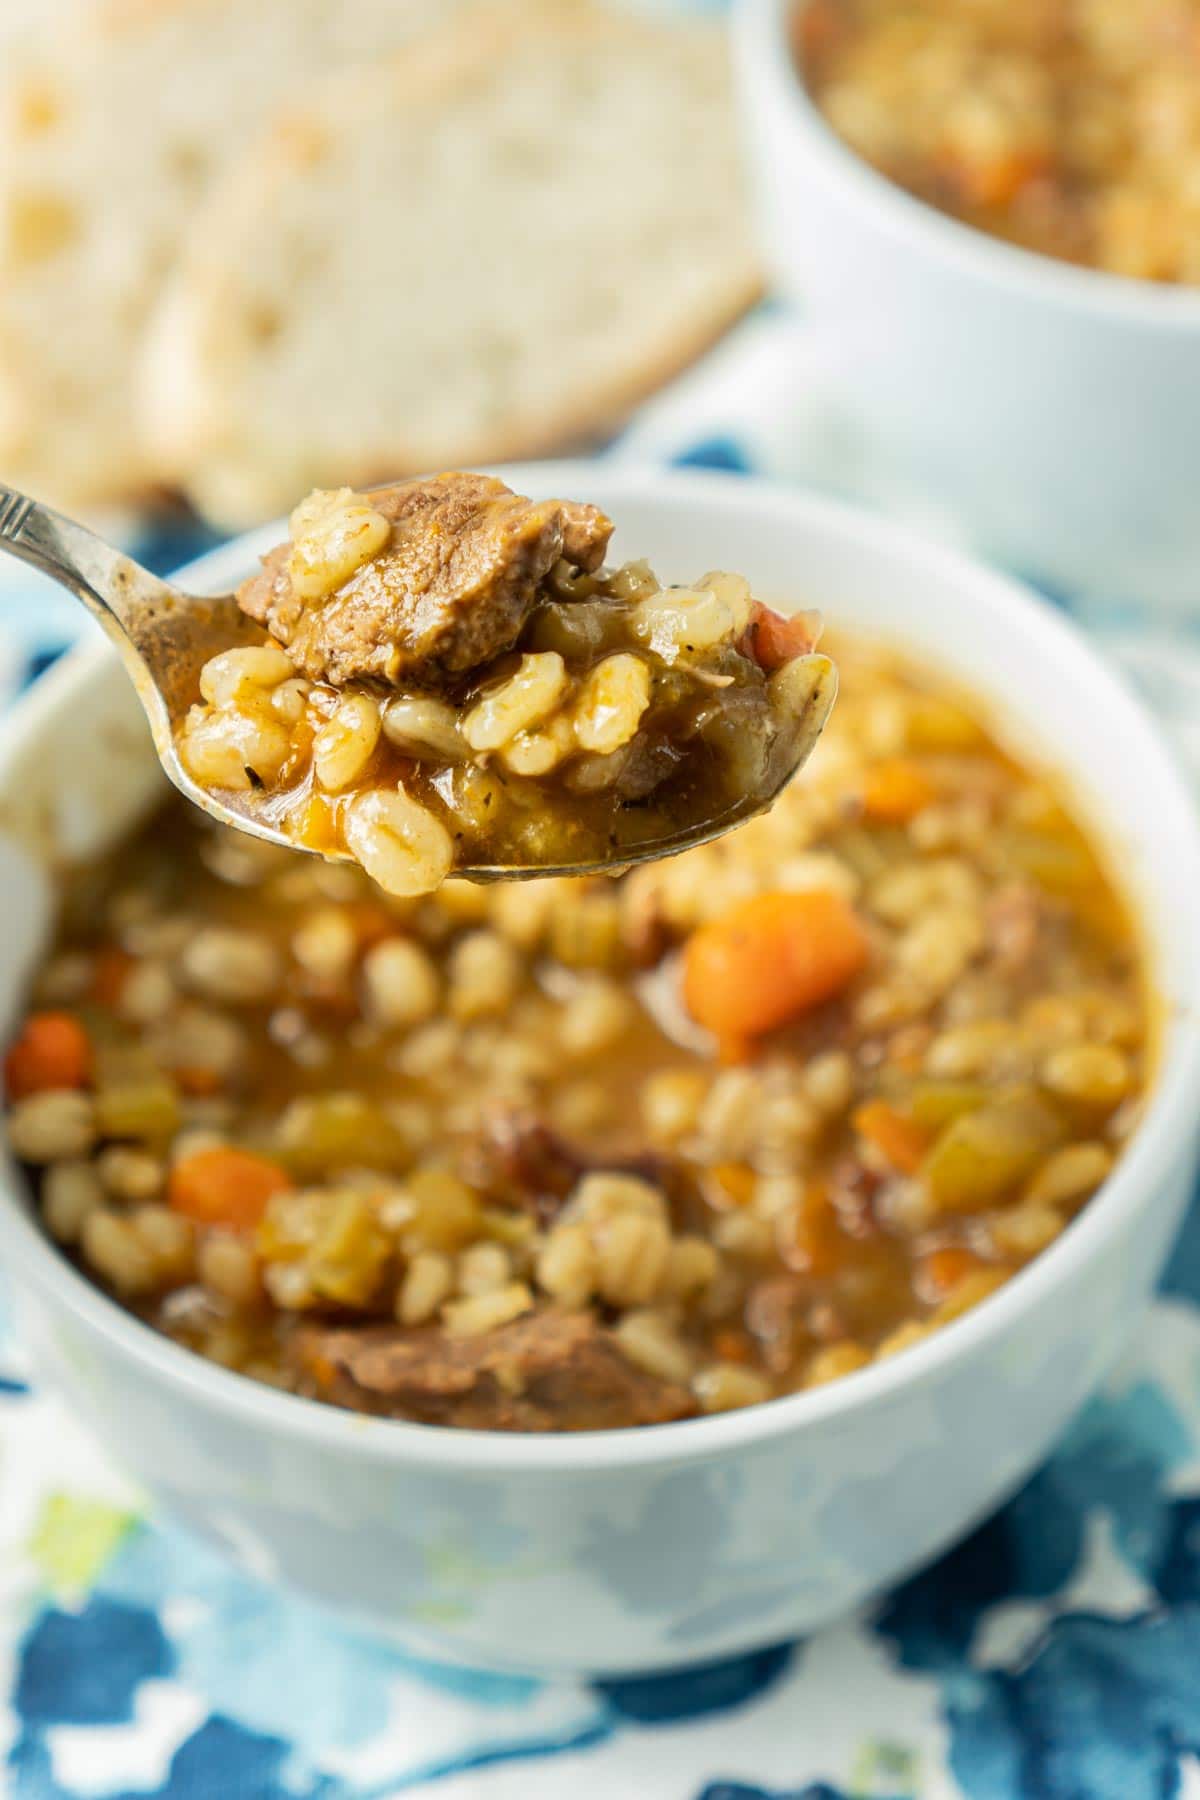 Spoon of beef barley soup above a bowl of beef and barley soup